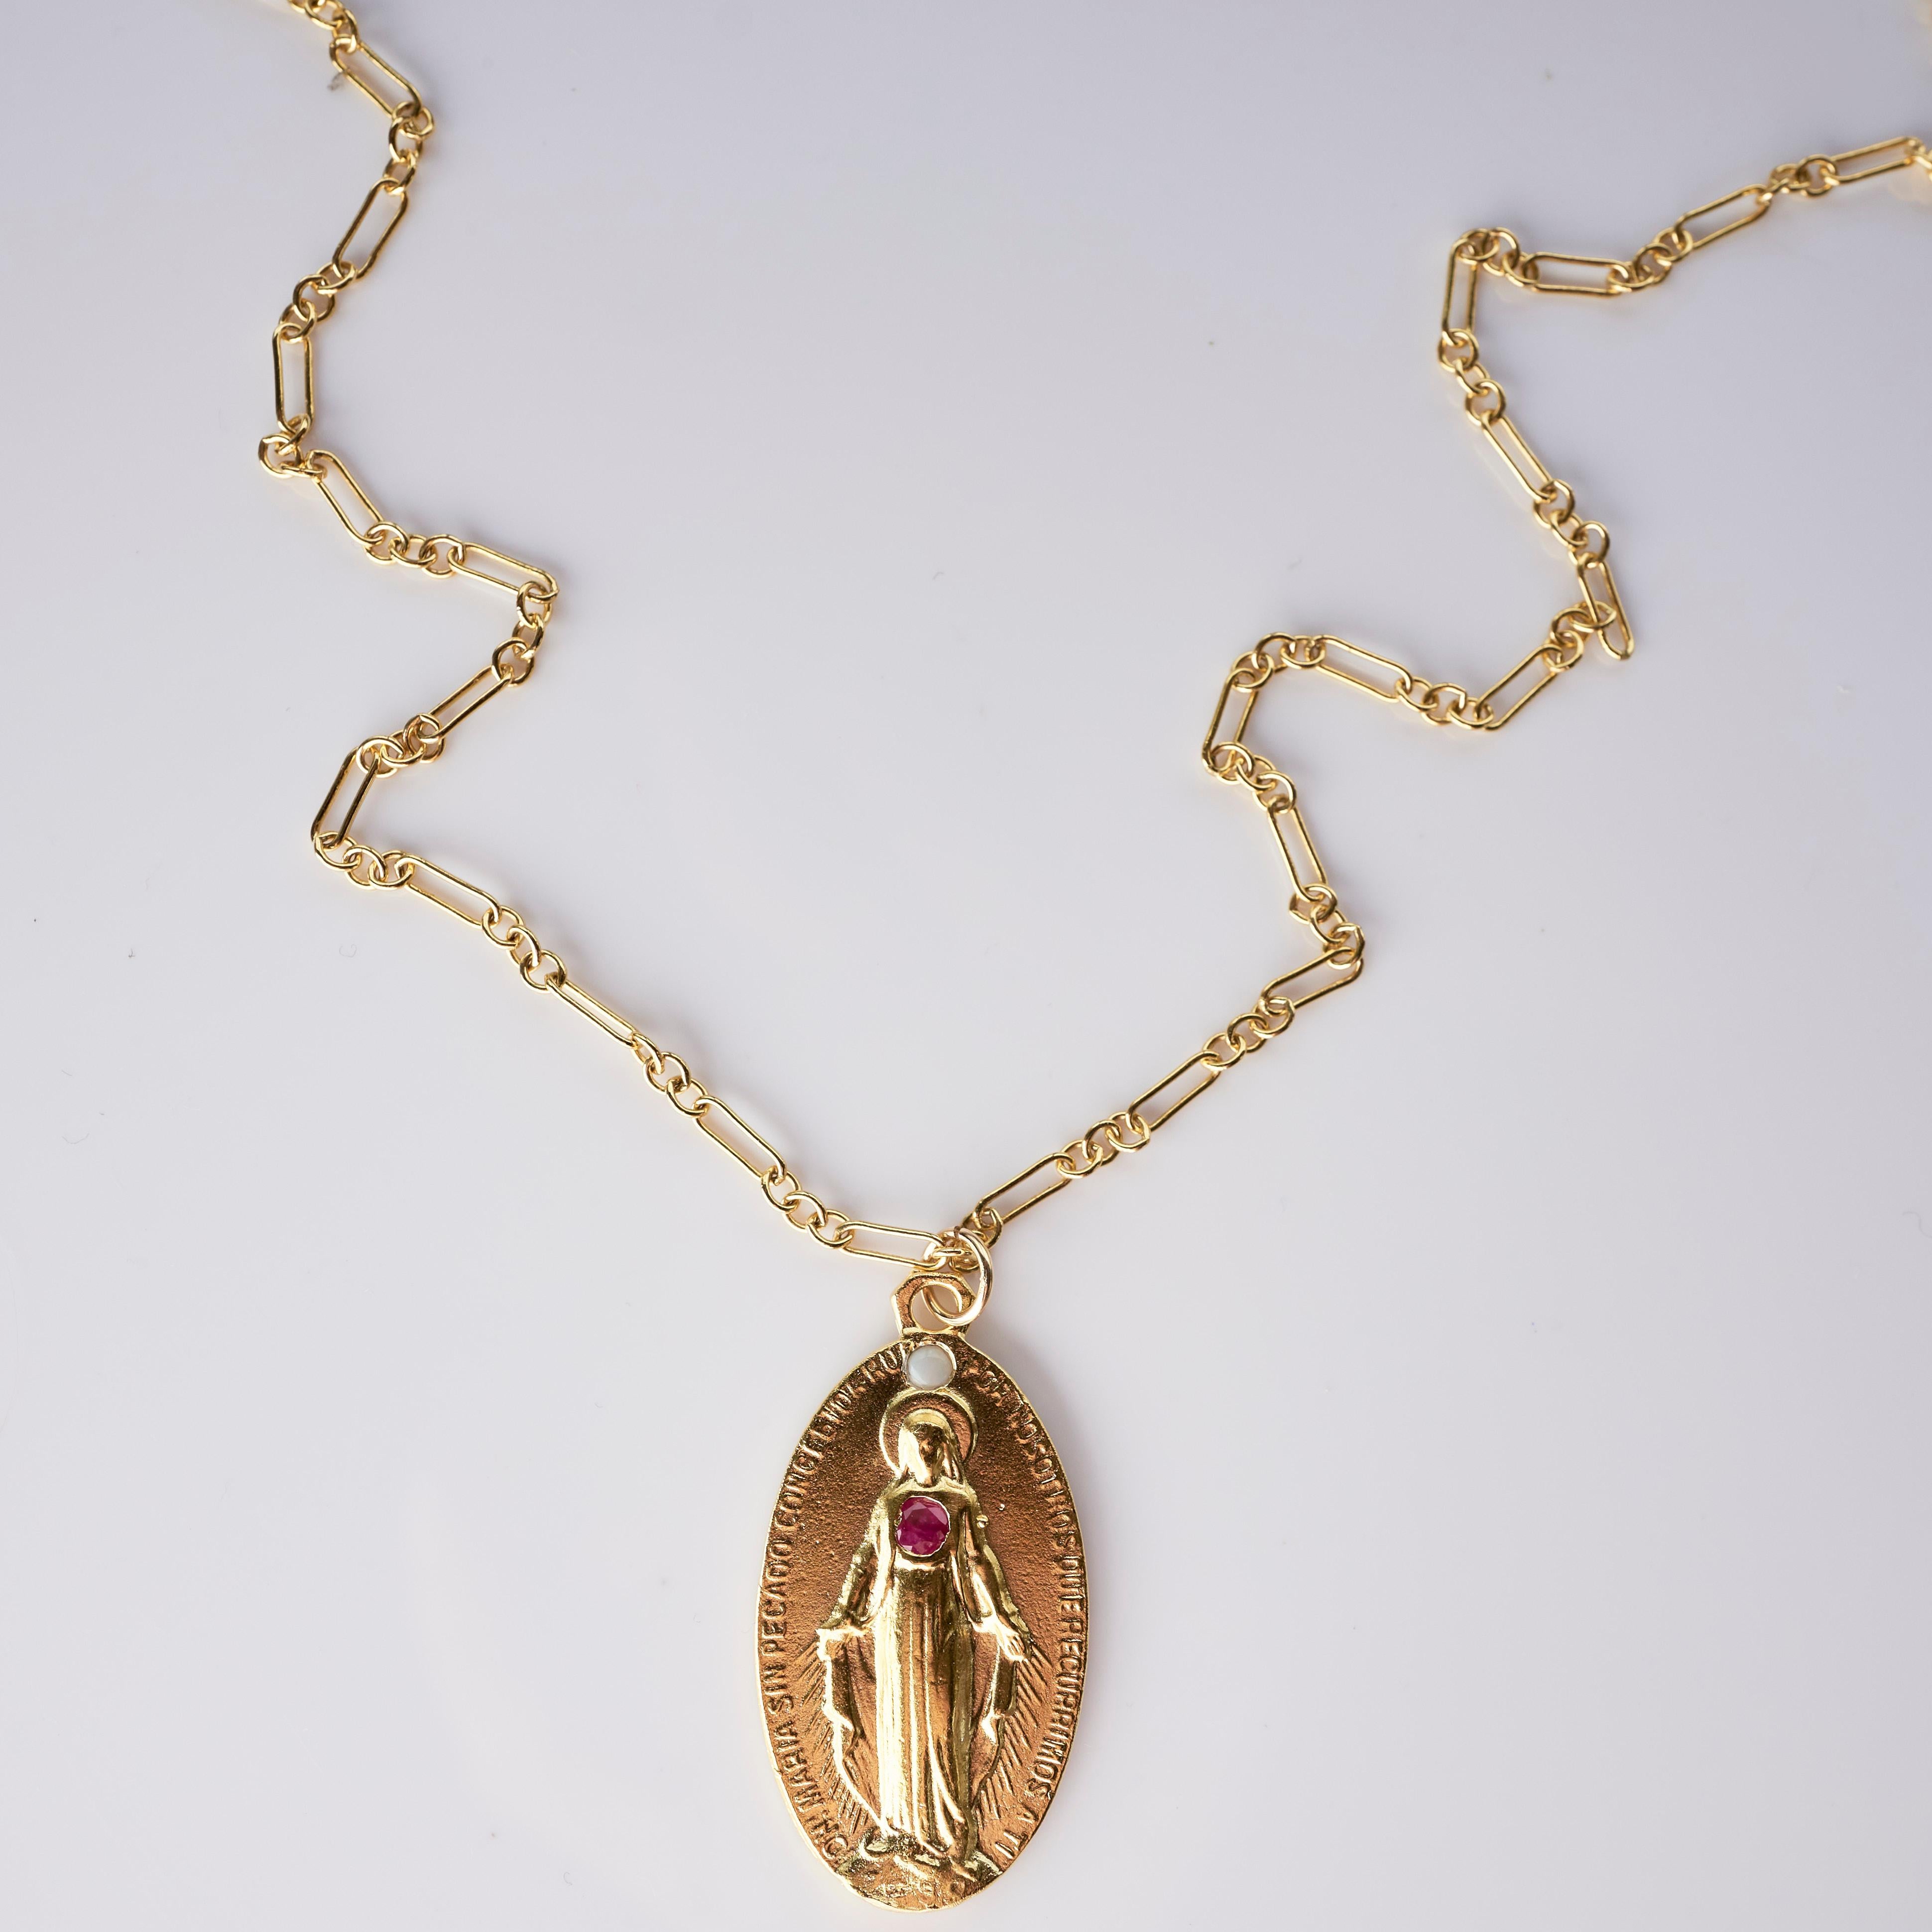 Contemporary Virgin Mary Ruby Opal Medal Chain Necklace J Dauphin For Sale